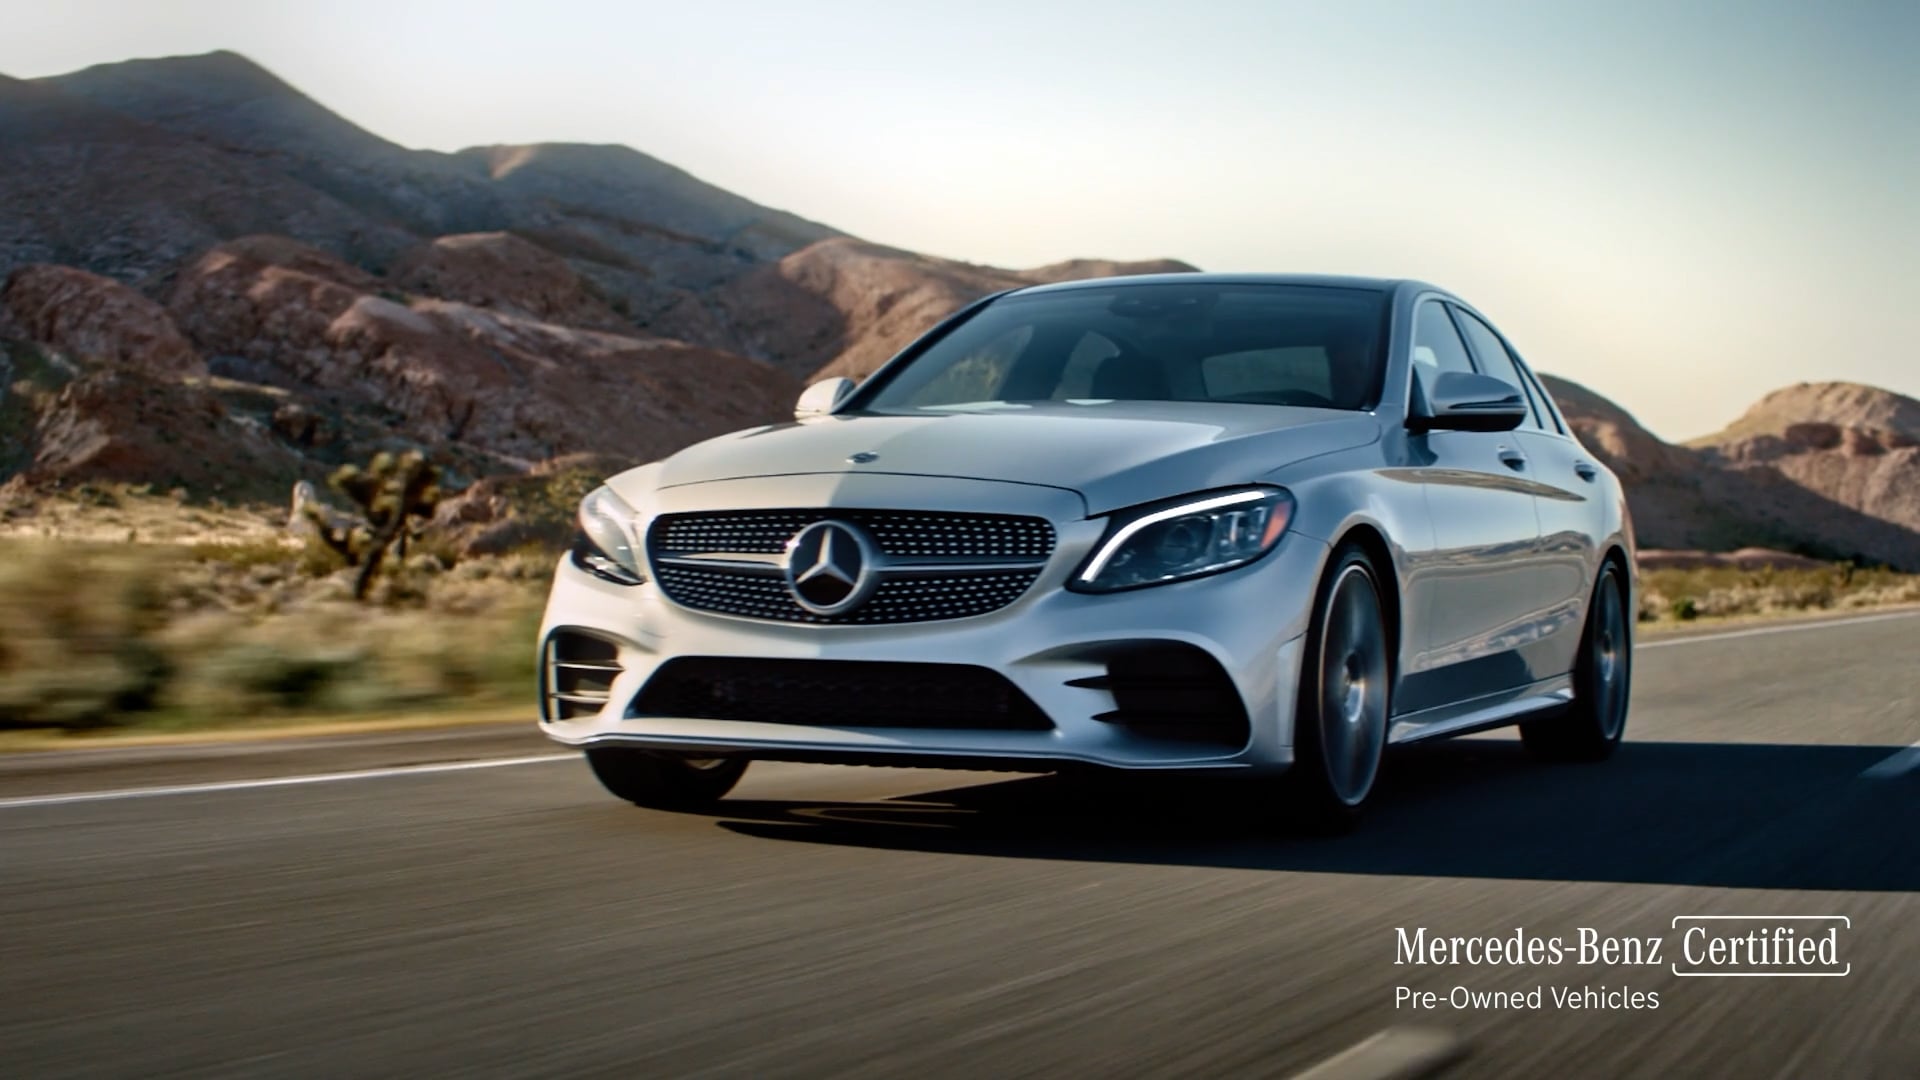 Mercedes-Benz | Certified Pre-Owned